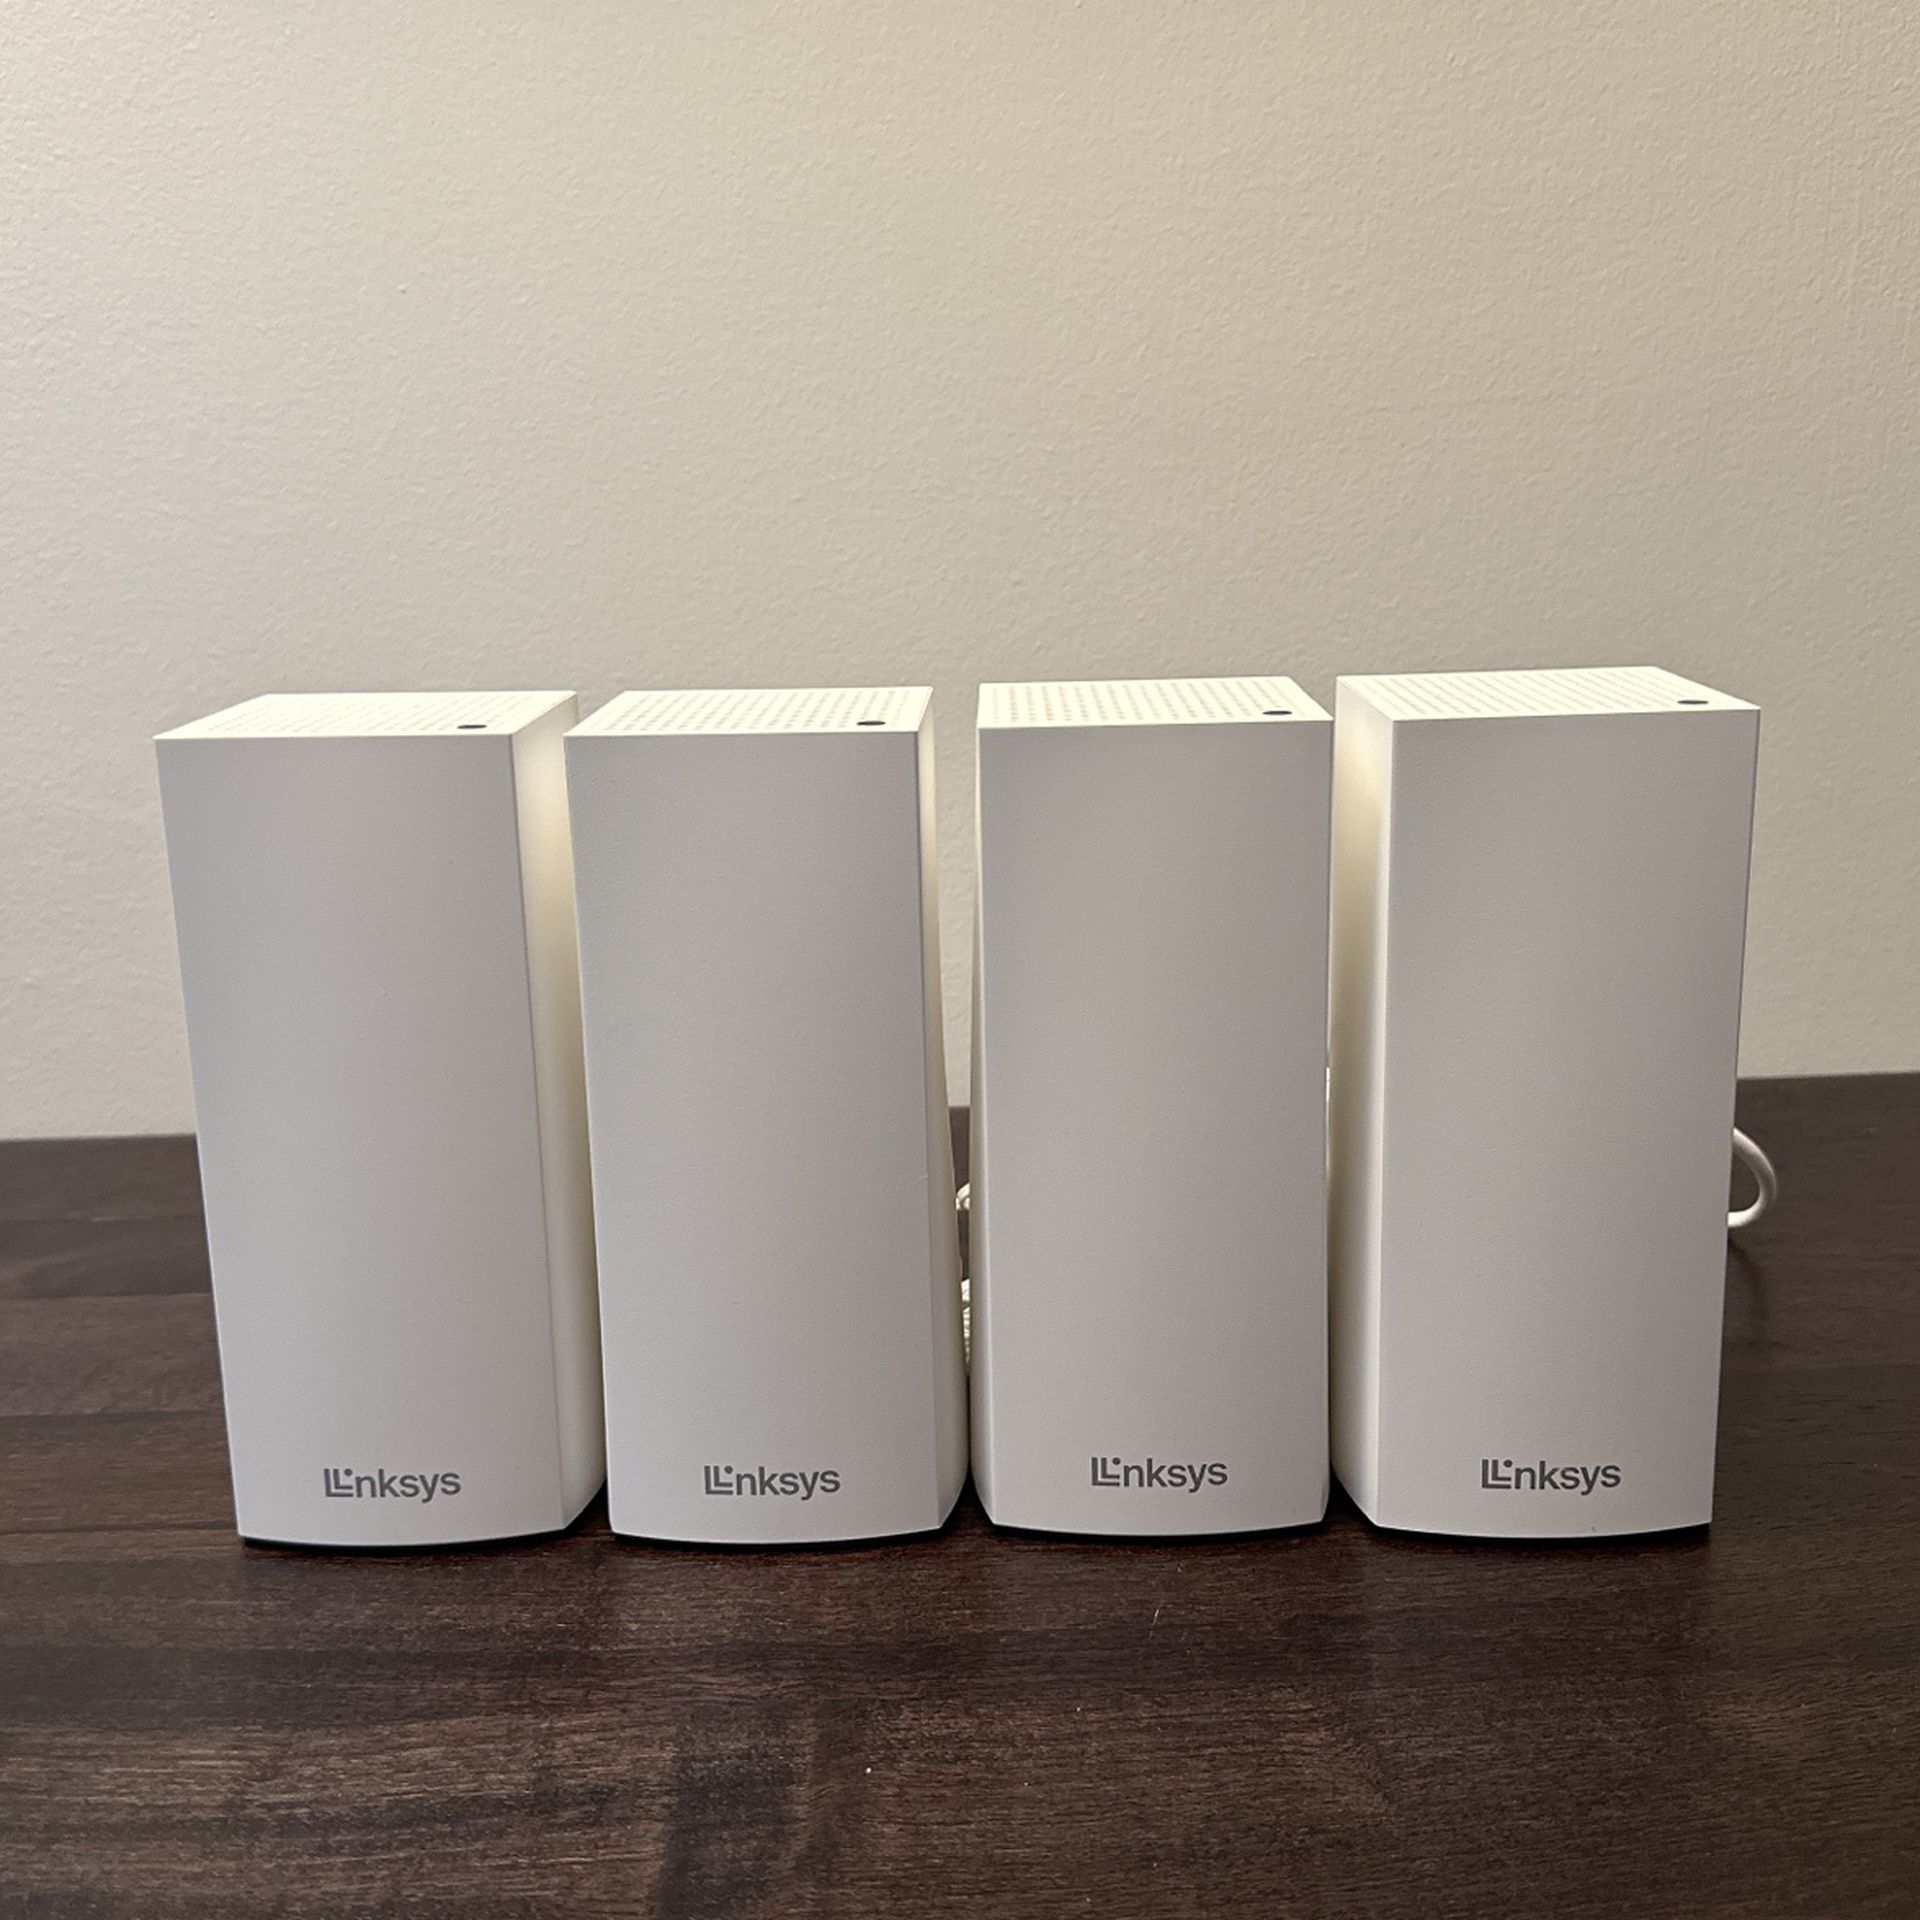 Linksys Atlas 6 Wi-Fi Routers For Sale - Read For Price